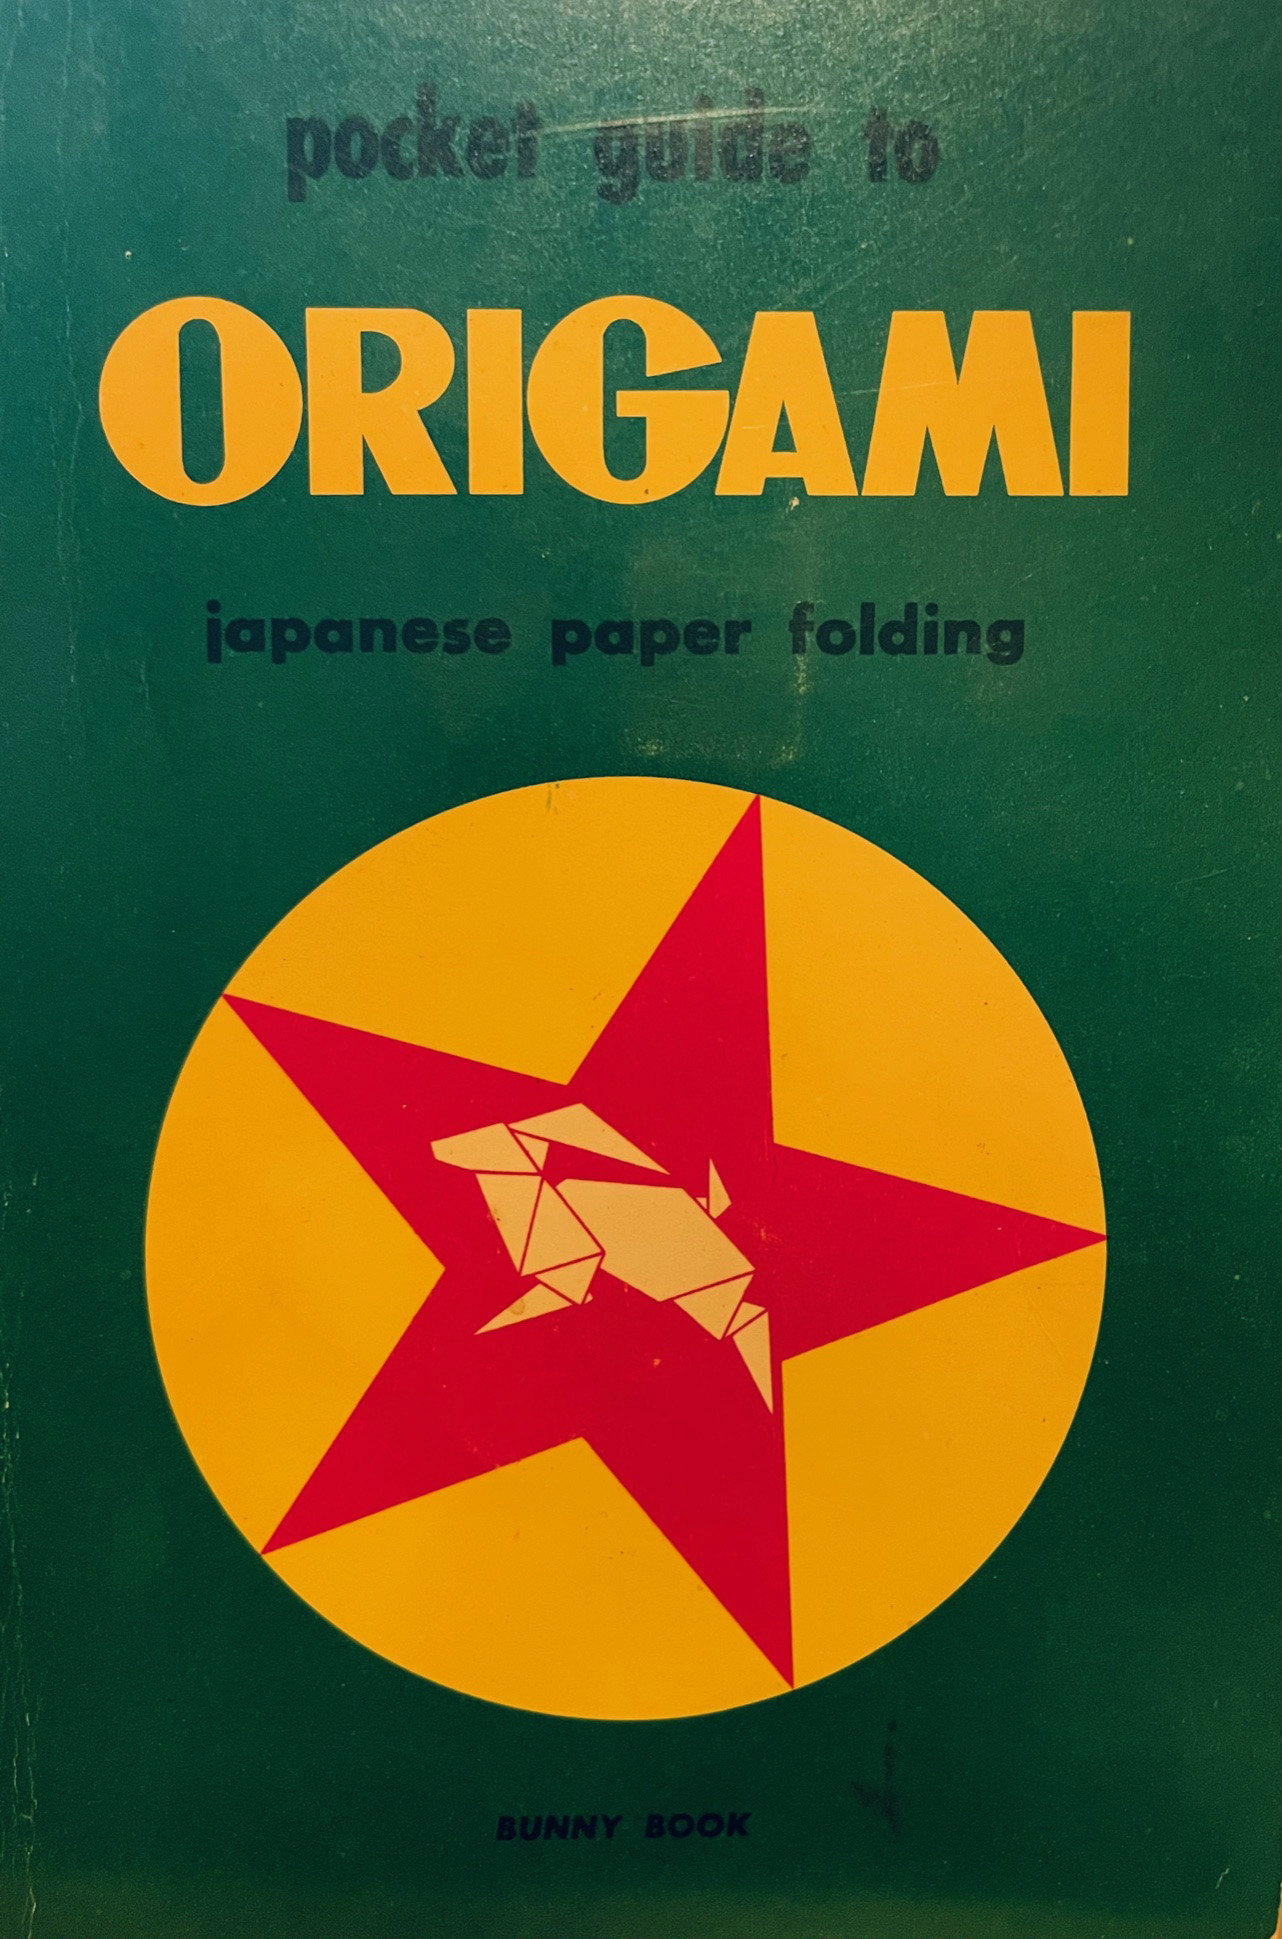 Pocket Guide to Origami - Bunny Book : page 7.